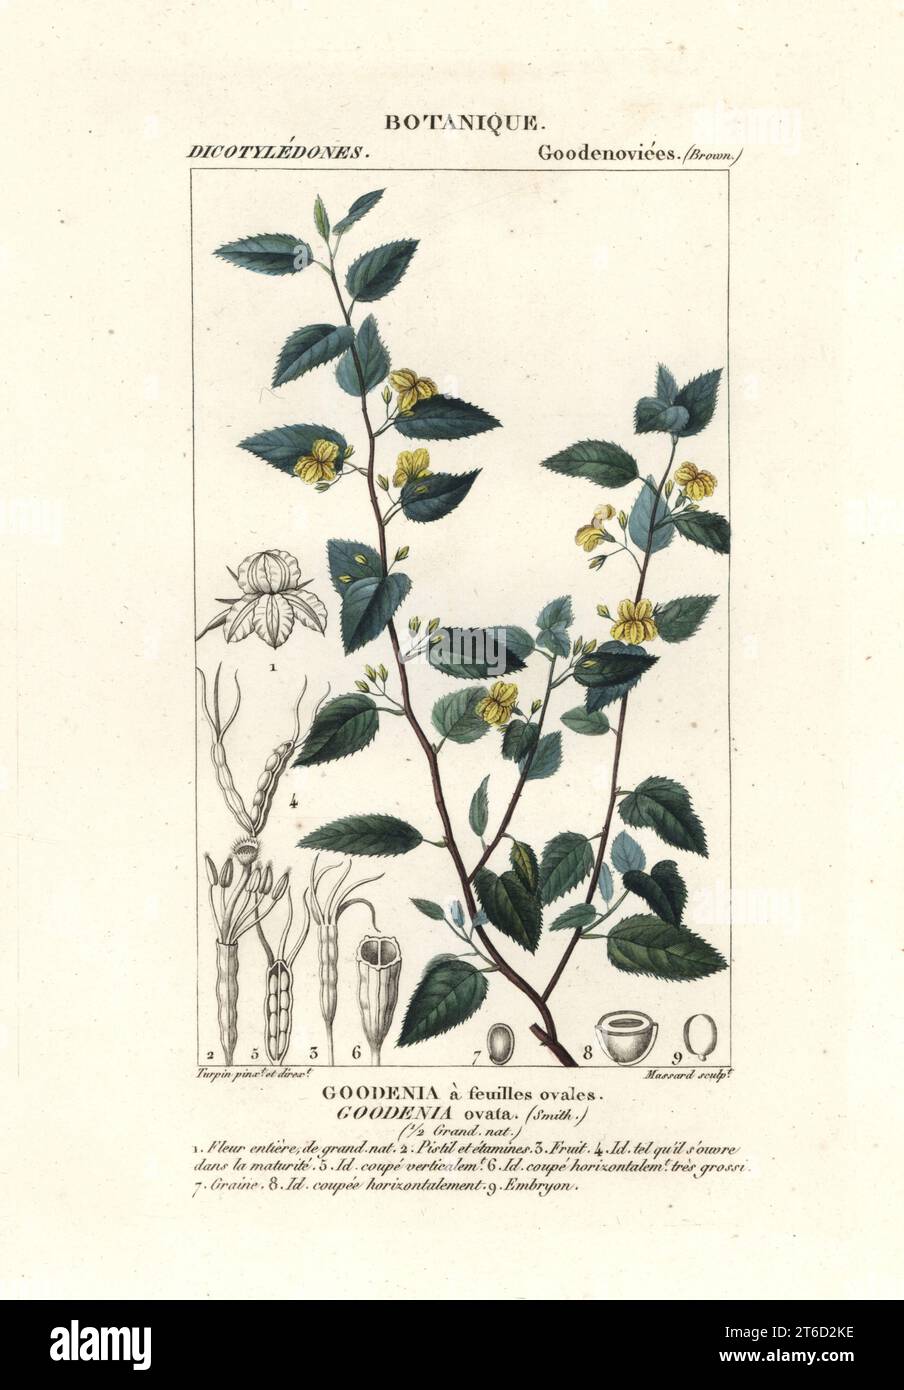 Hop goodenia, Goodenia ovata, Goodenia a feuilles ovales, native to Australia. Handcoloured copperplate stipple engraving from Antoine Laurent de Jussieu's Dizionario delle Scienze Naturali, Dictionary of Natural Science, Florence, Italy, 1837. Illustration engraved by Massard, drawn and directed by Pierre Jean-Francois Turpin, and published by Batelli e Figli. Turpin (1775-1840) is considered one of the greatest French botanical illustrators of the 19th century. Stock Photo